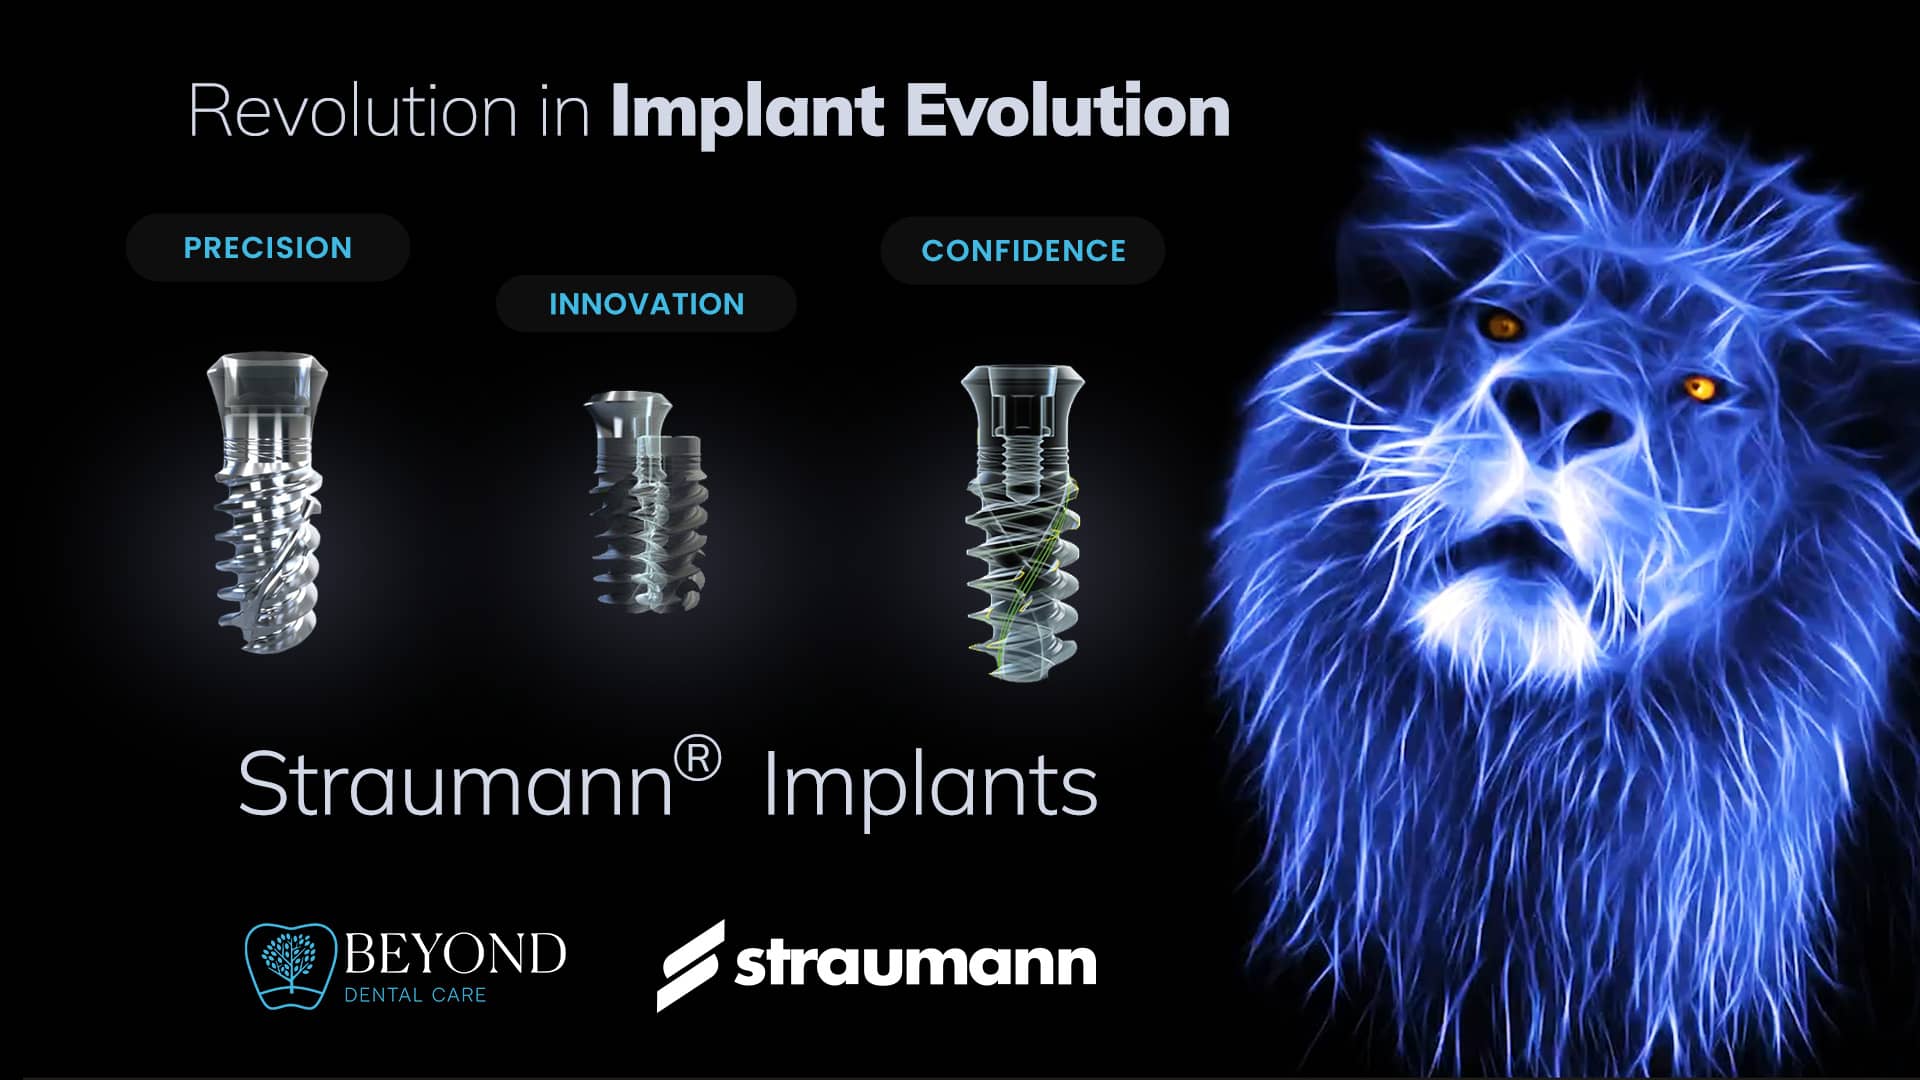 A New Era of Smile Confidence with Straumann® Implants